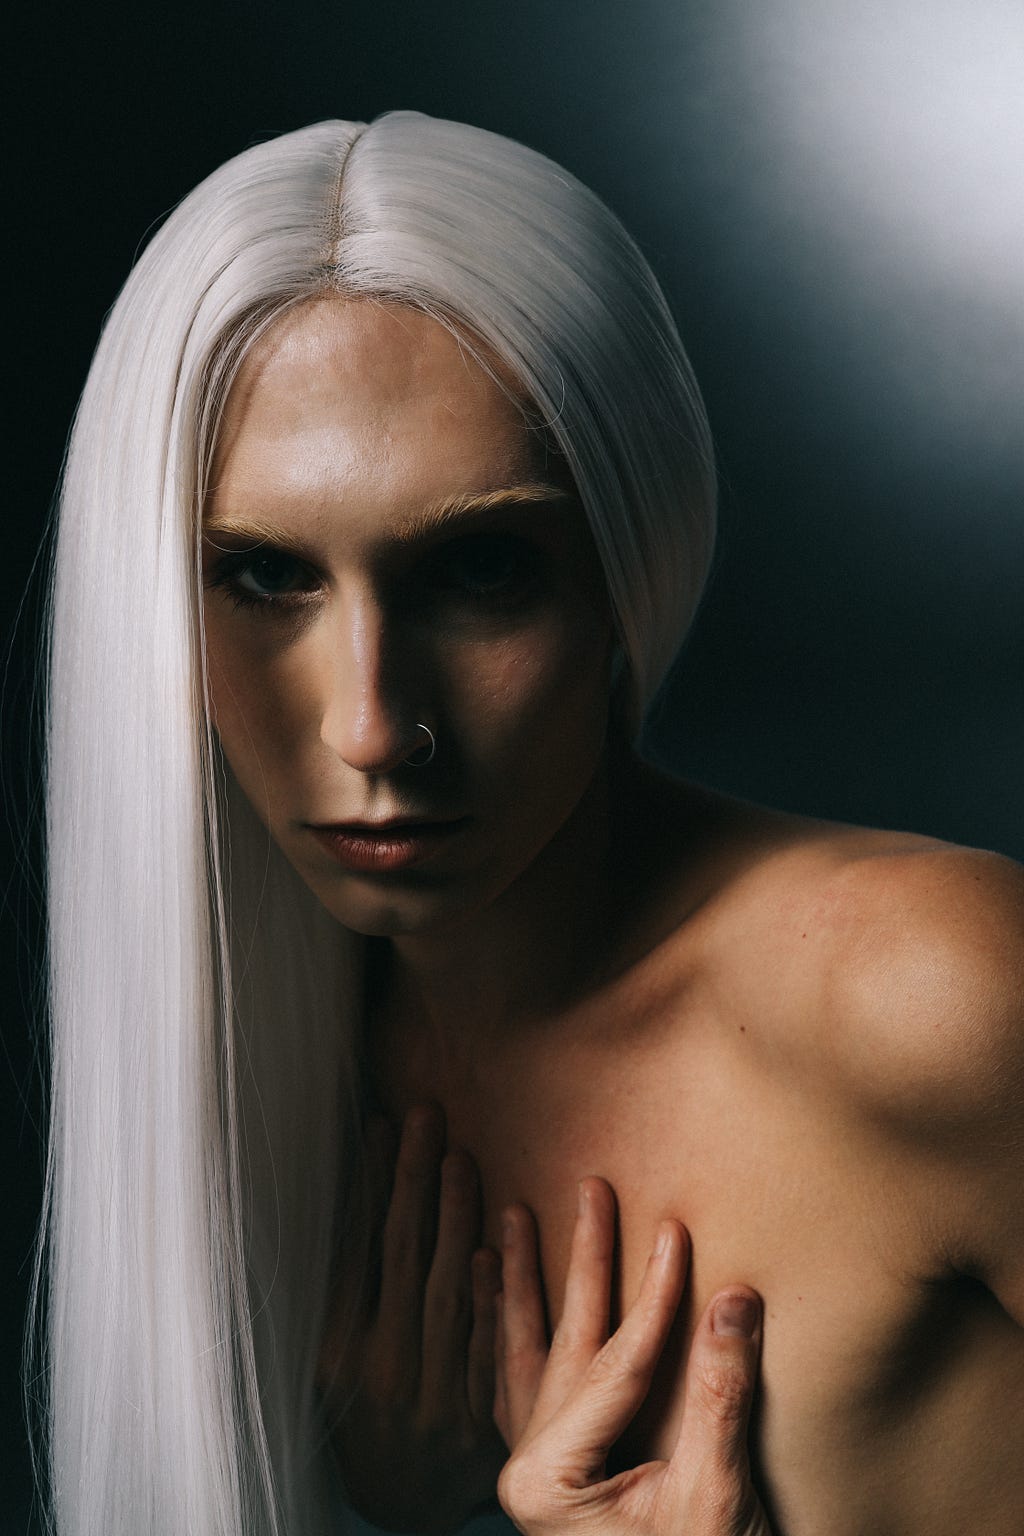 Buffy, close to the camera, intently stares forward wearing long white hair, her shoulders exposed with her hands covering her chest.